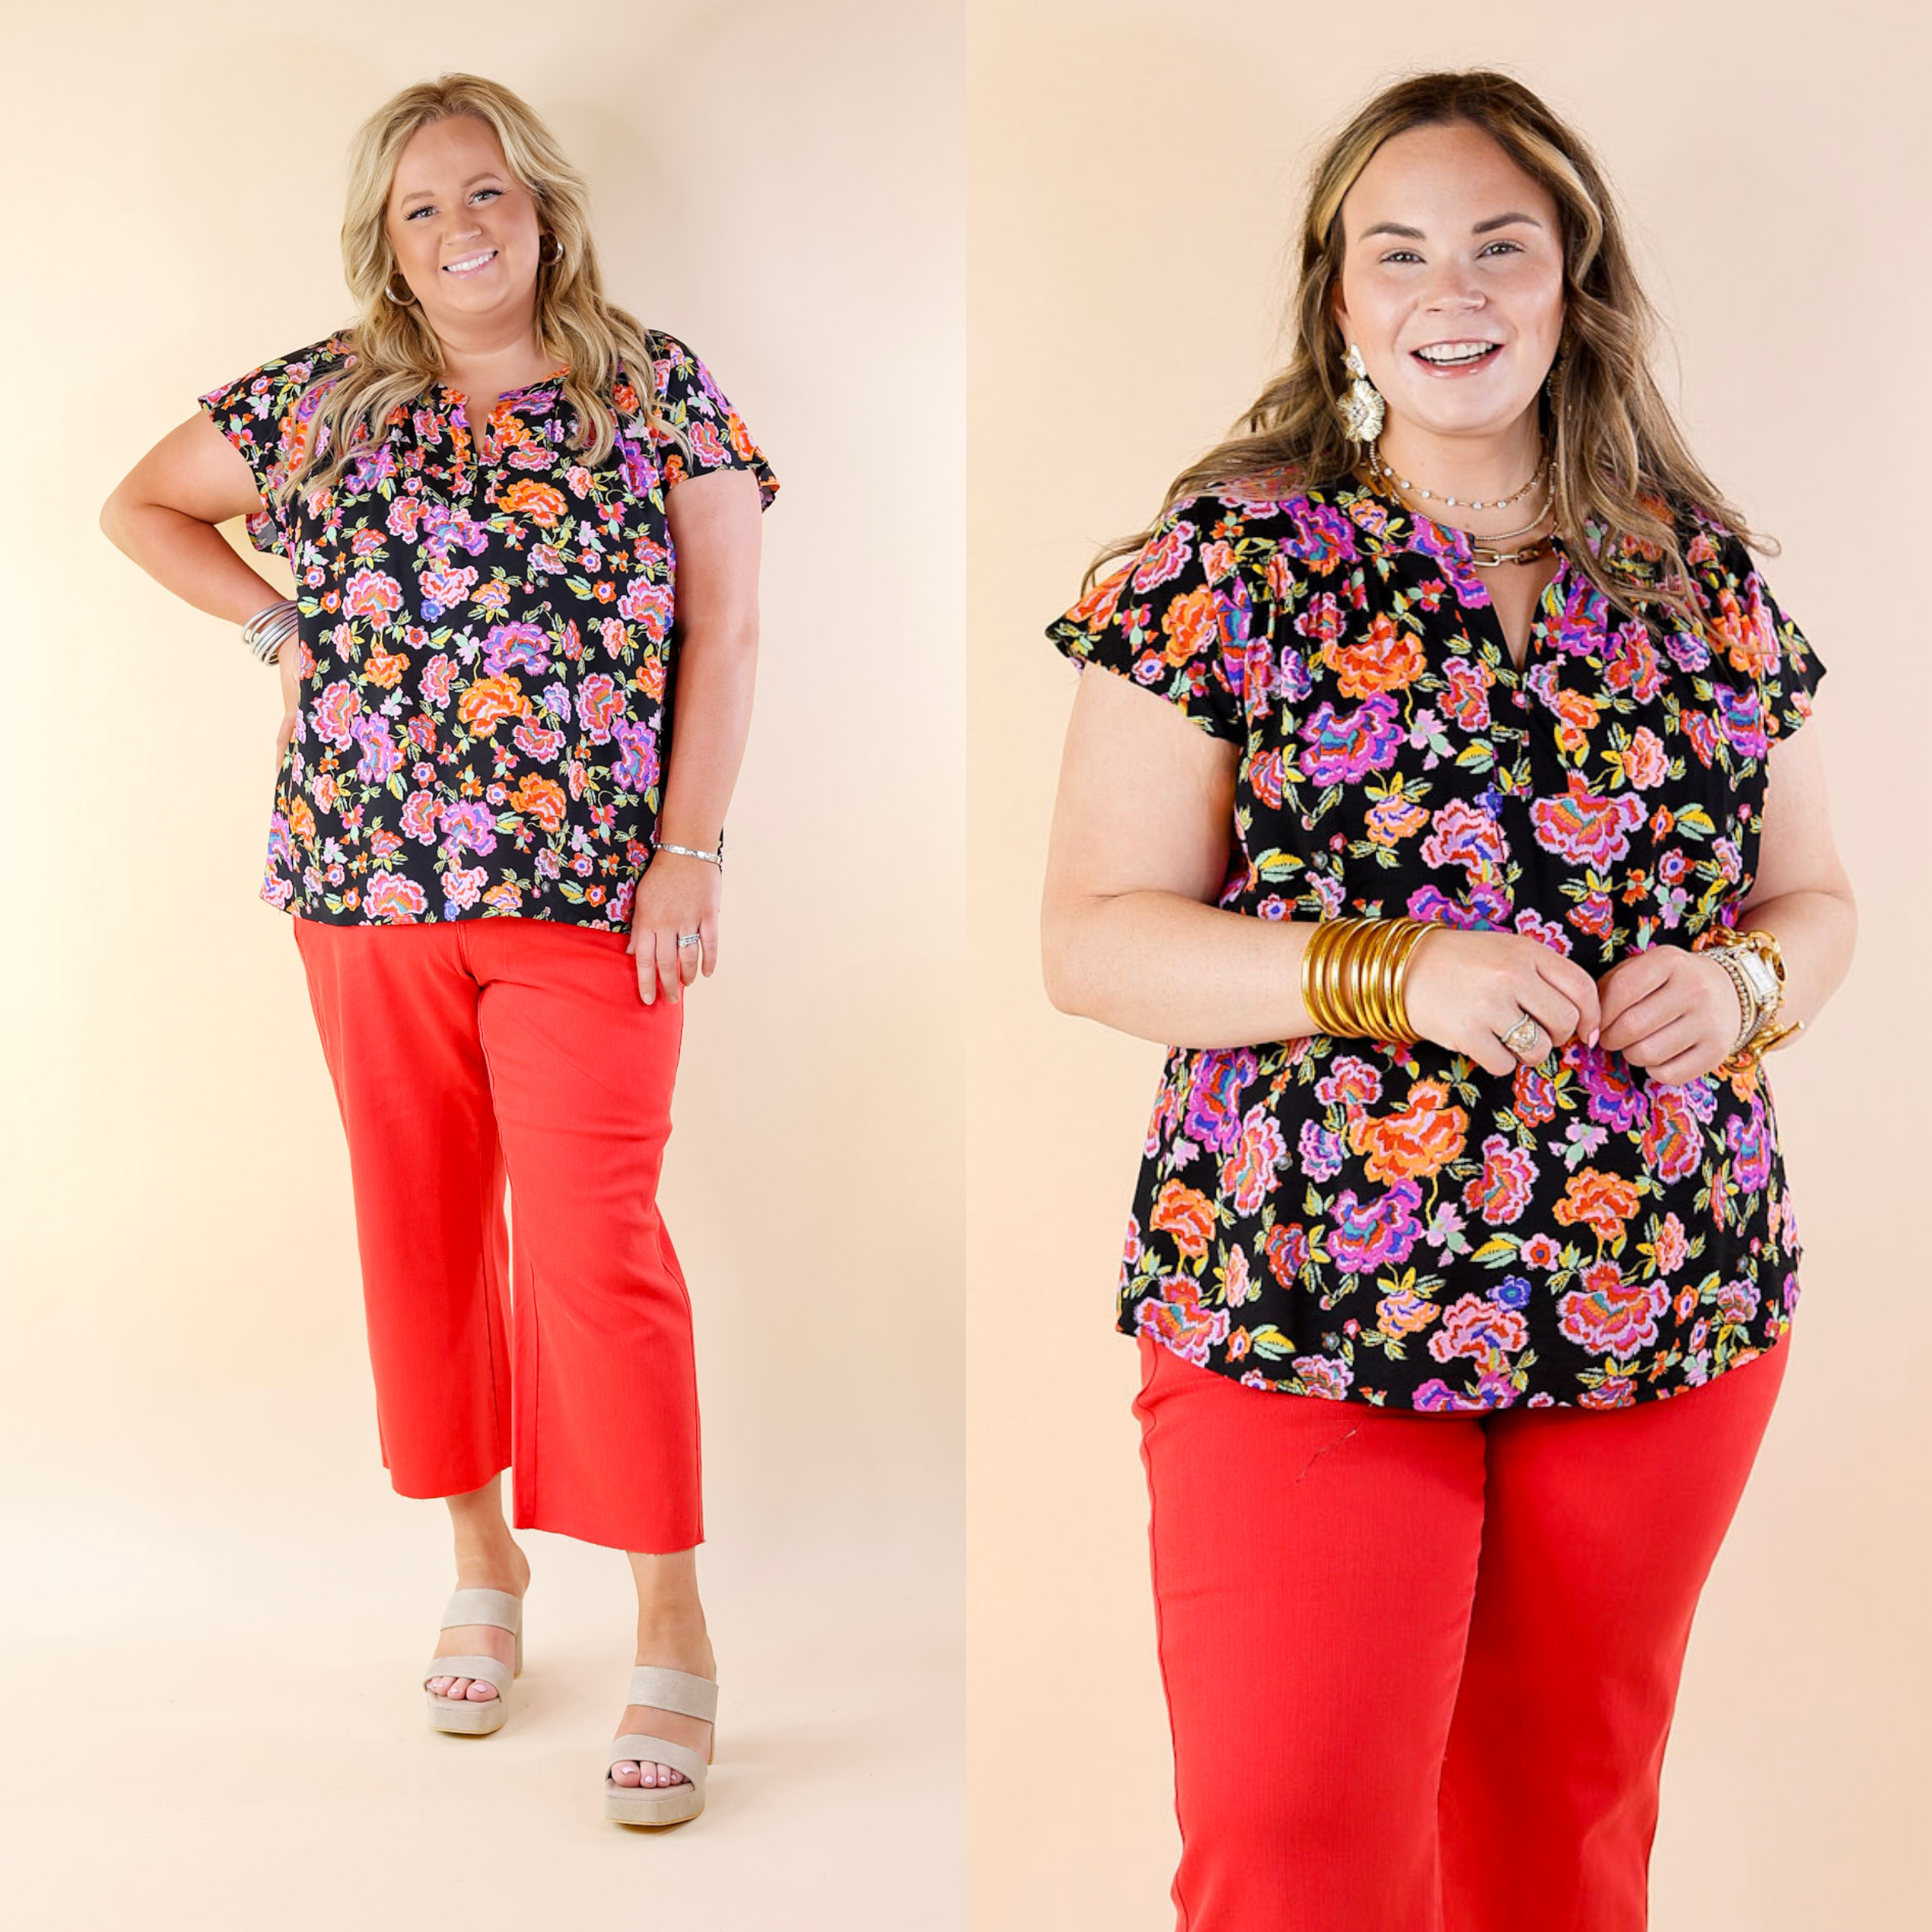 Whimsical Wonder Floral Print Top with Notched Neckline and Drop Sleeves in Black - Giddy Up Glamour Boutique